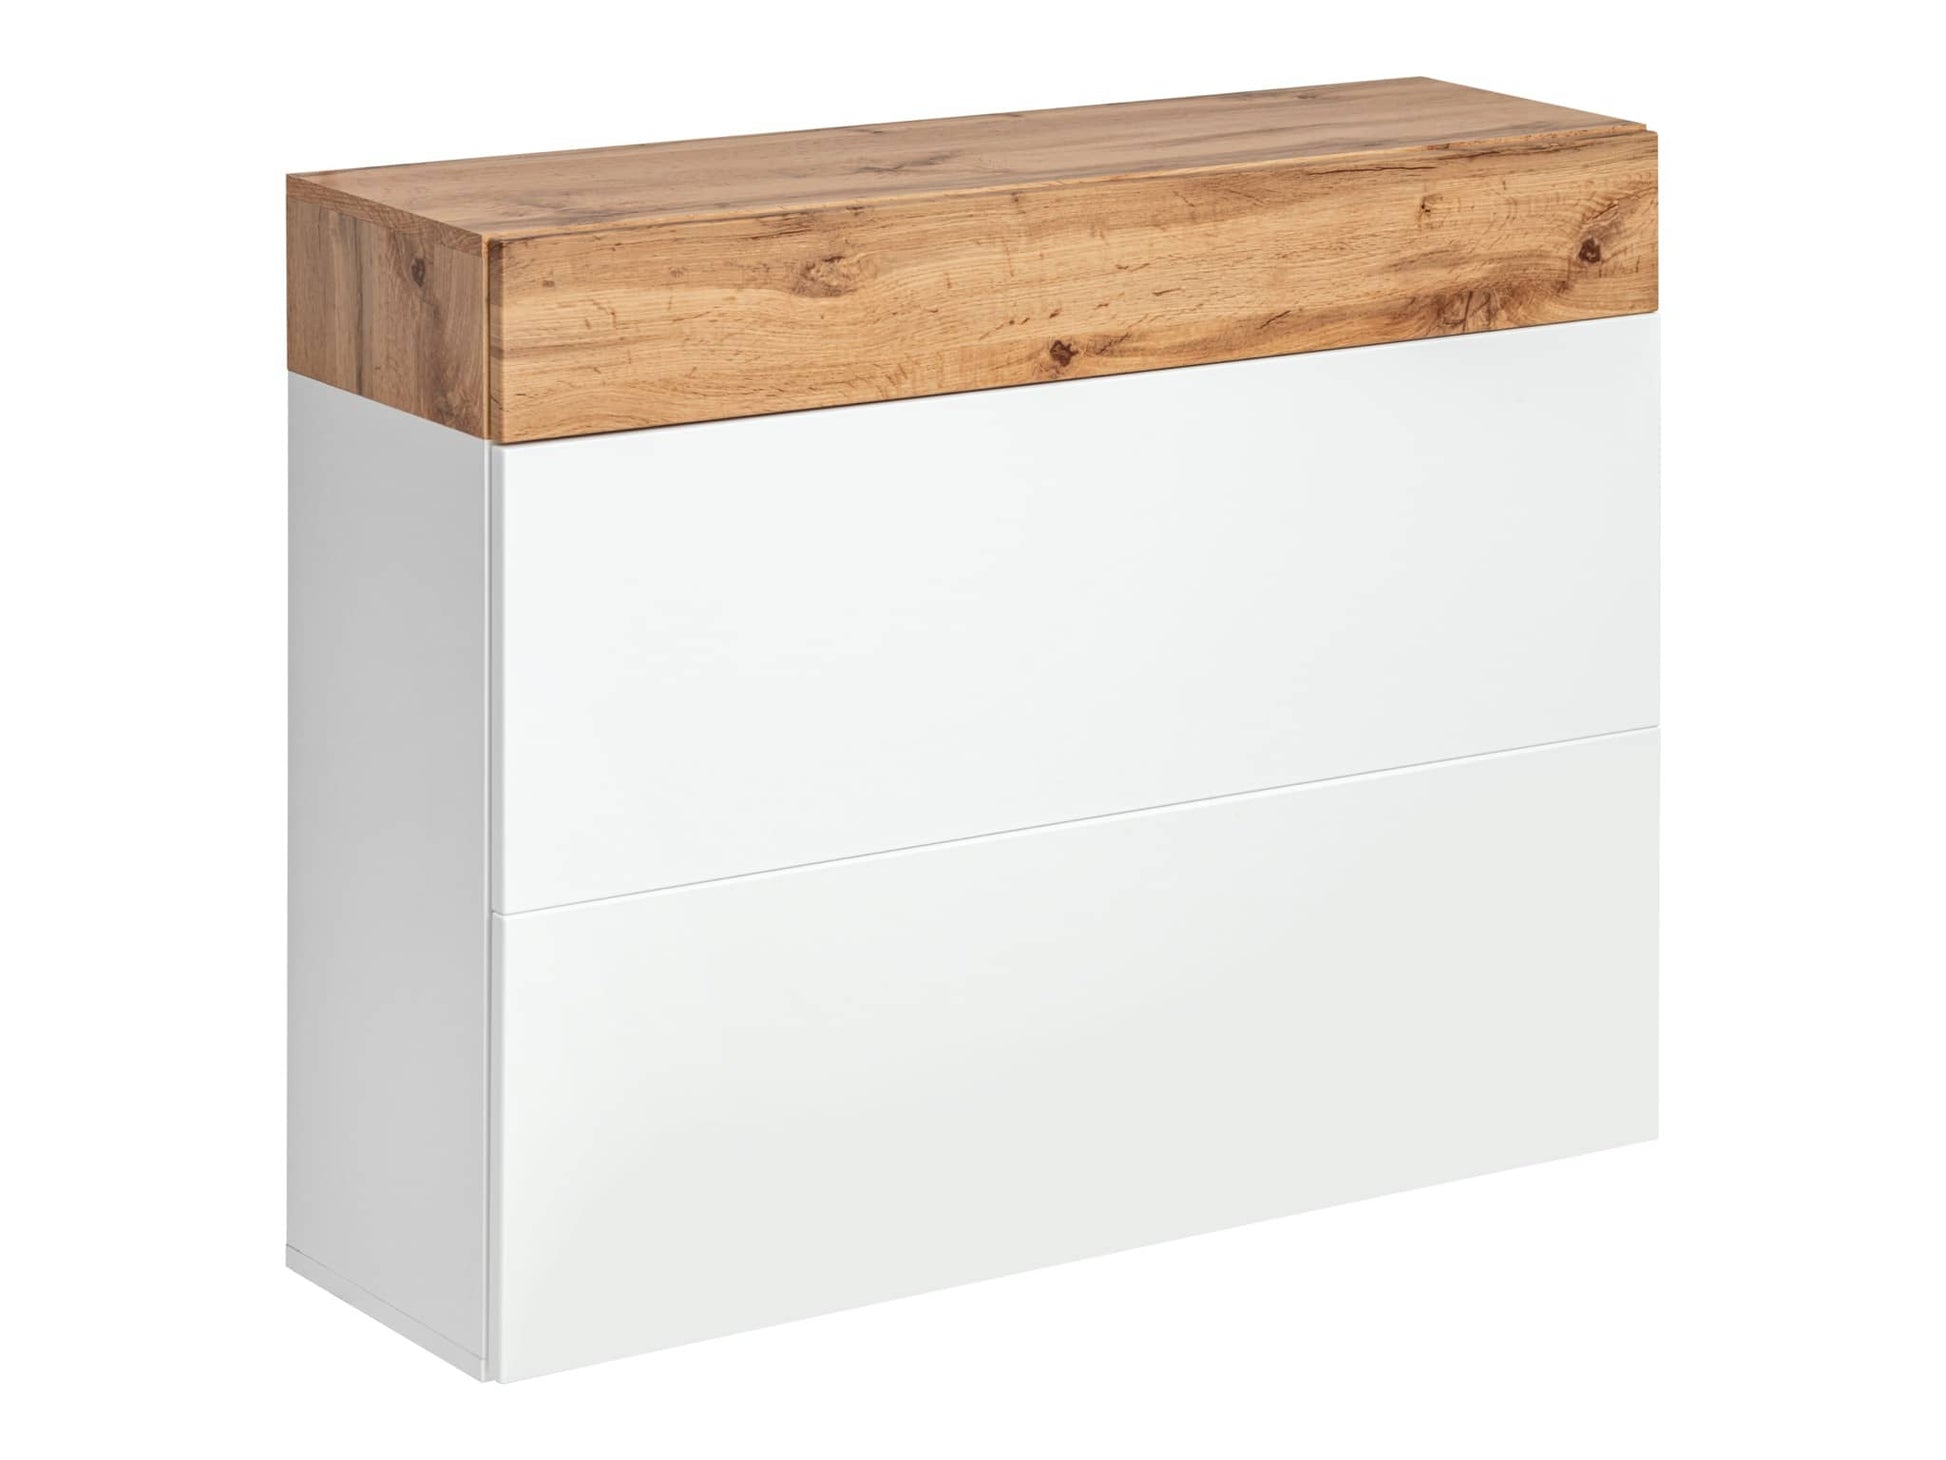 Easy EY-09 Shoe Cabinet All Homely